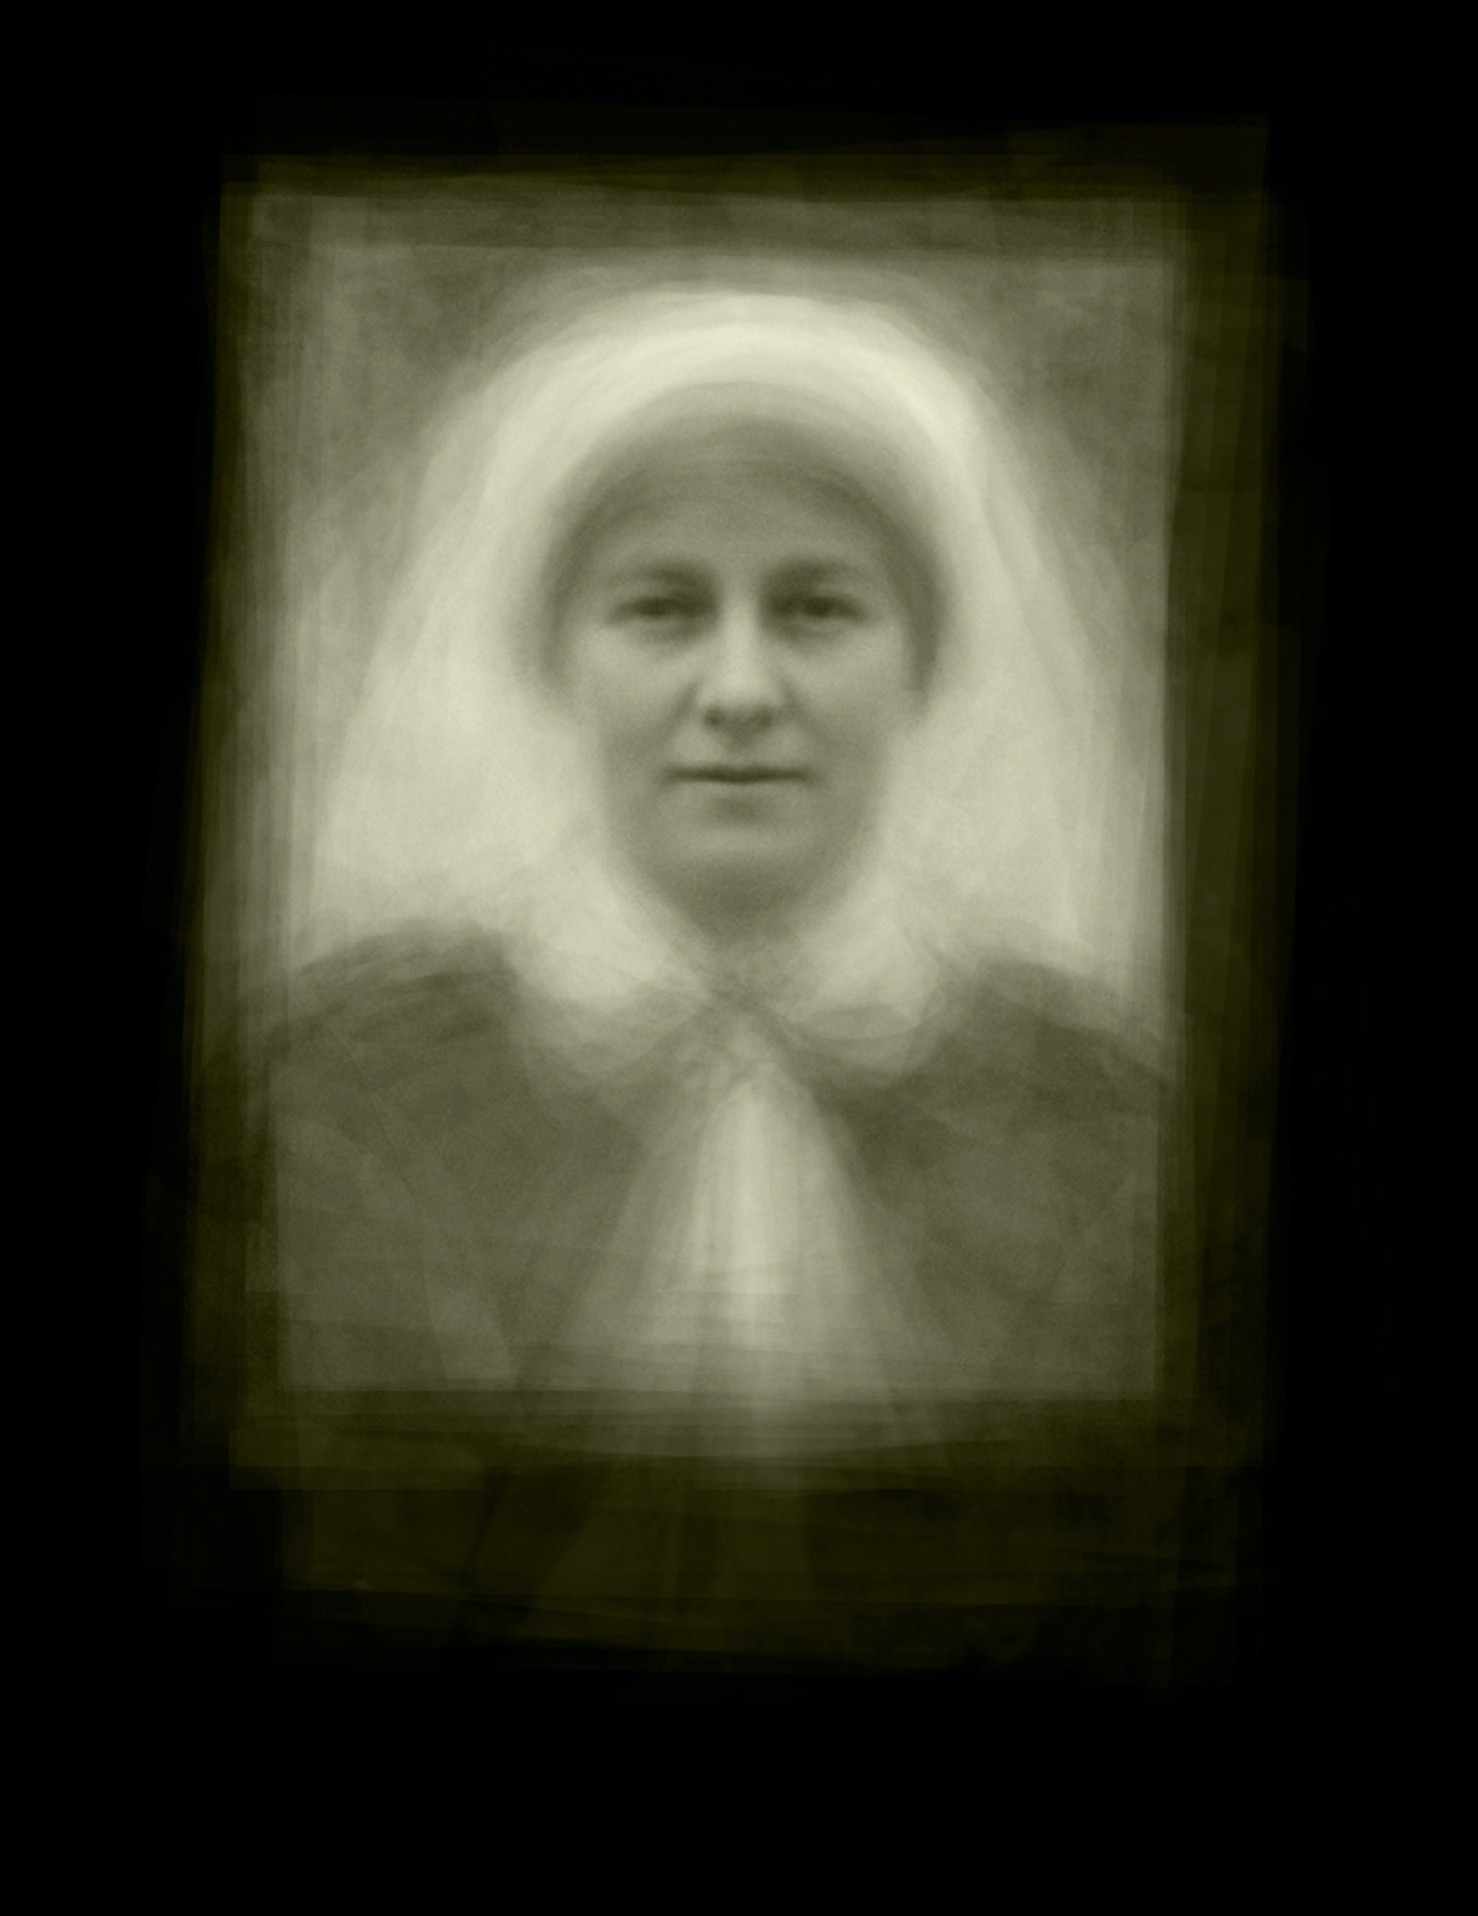 Photograph overlaying images of nurses in the first world war